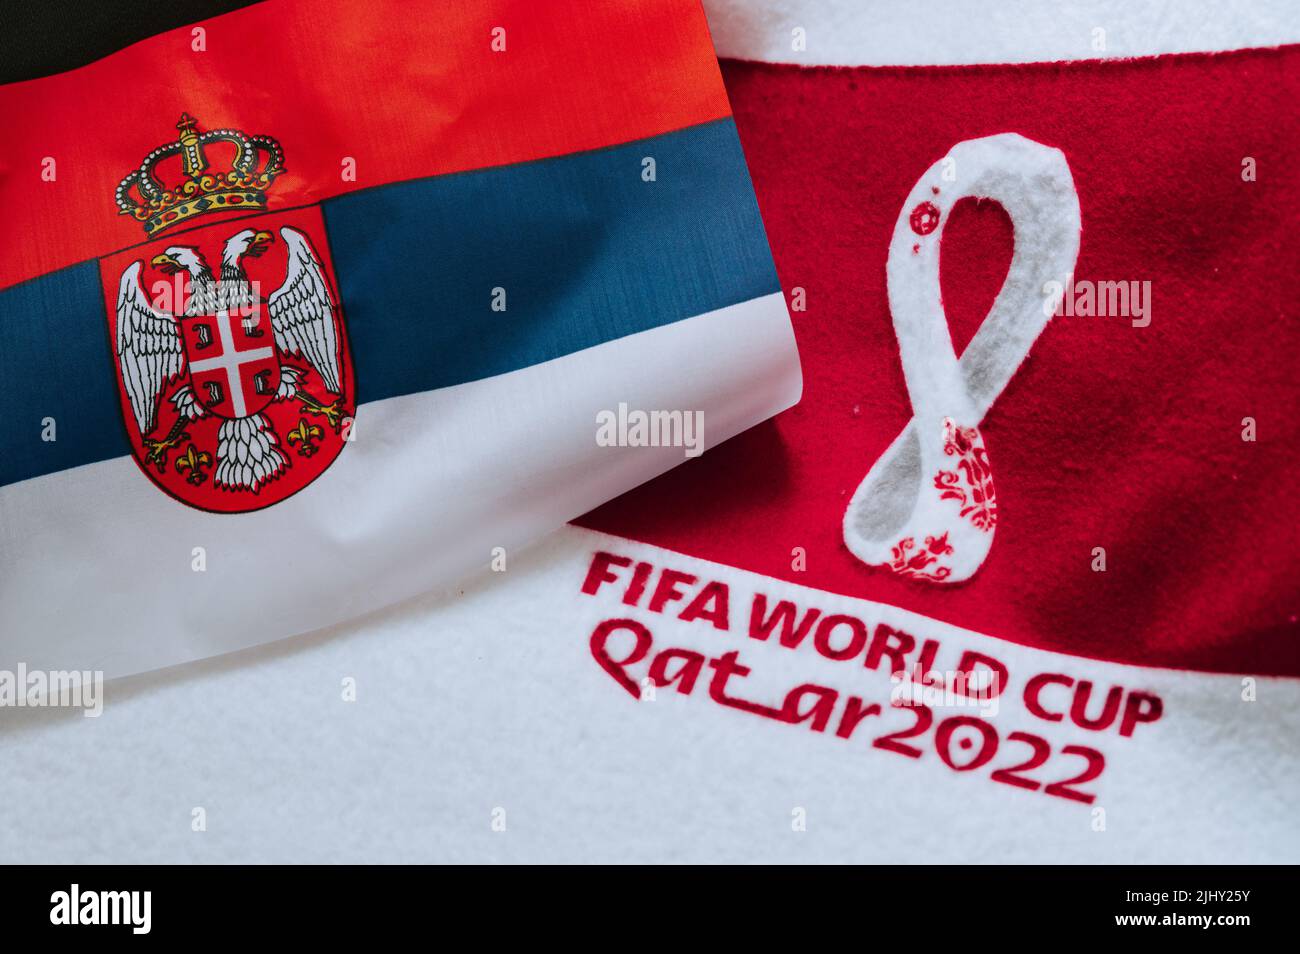 QATAR, DOHA, 18 JULY, 2022: Serbia National flag and logo of FIFA World Cup in Qatar 2022 on red carpet. Soccer sport background, edit space. Qatar 22 Stock Photo